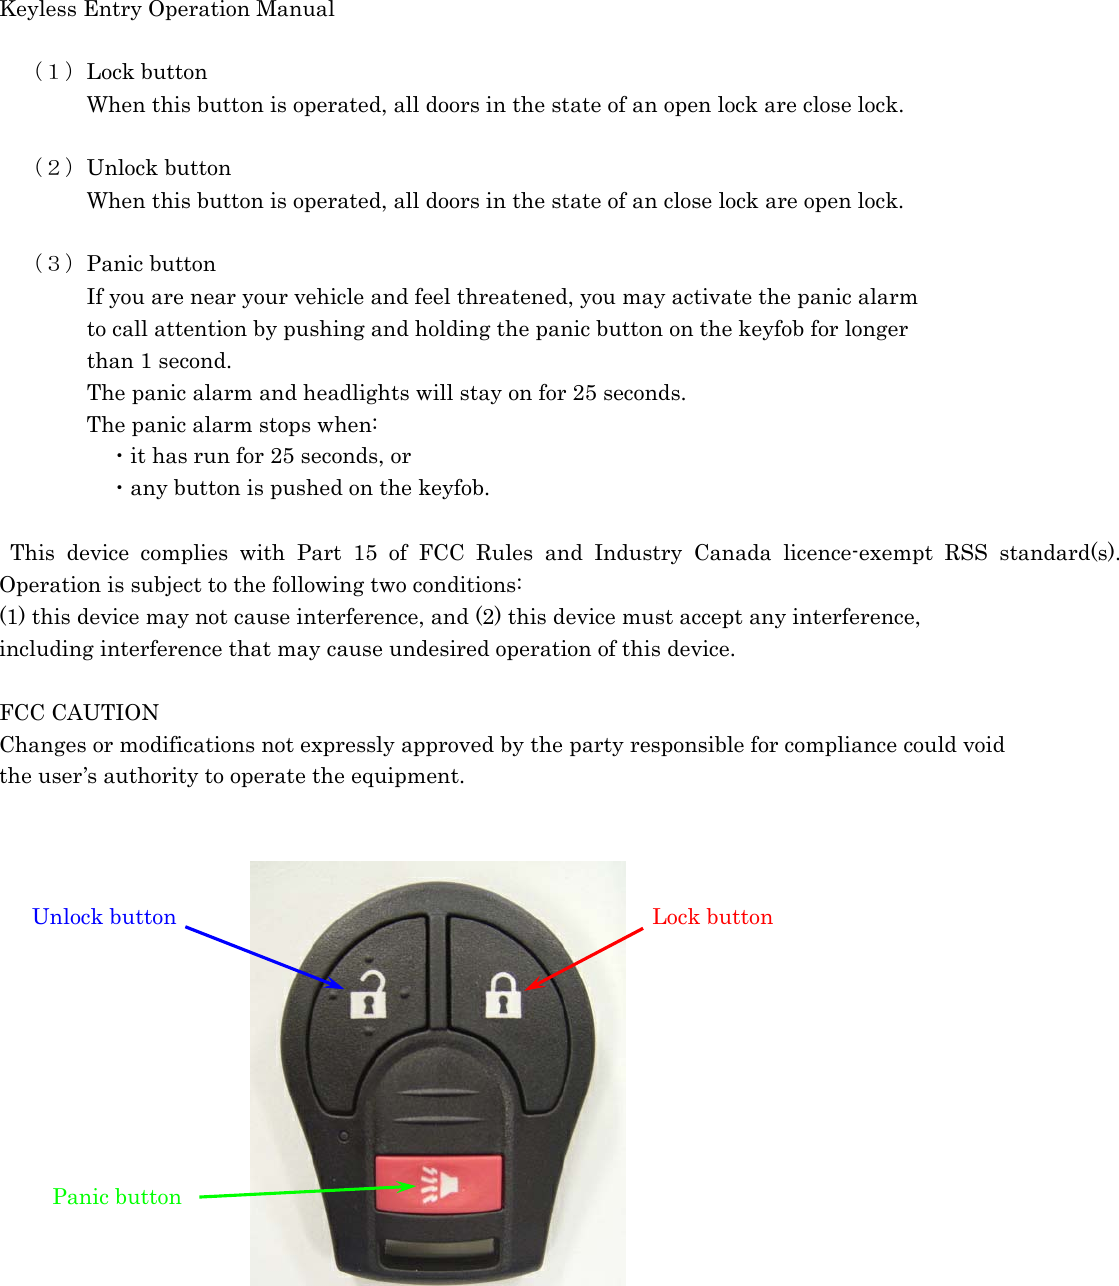 Keyless Entry Operation Manual   （１）Lock button     When this button is operated, all doors in the state of an open lock are close lock.    （２）Unlock button     When this button is operated, all doors in the state of an close lock are open lock.      （３）Panic button     If you are near your vehicle and feel threatened, you may activate the panic alarm         to call attention by pushing and holding the panic button on the keyfob for longer         than 1 second.                 The panic alarm and headlights will stay on for 25 seconds.     The panic alarm stops when:      ・it has run for 25 seconds, or        ・any button is pushed on the keyfob.   This device complies with Part 15 of FCC Rules and Industry Canada licence-exempt RSS standard(s). Operation is subject to the following two conditions:   (1) this device may not cause interference, and (2) this device must accept any interference,   including interference that may cause undesired operation of this device.    FCC CAUTION   Changes or modifications not expressly approved by the party responsible for compliance could void   the user’s authority to operate the equipment.                  Unlock button  Lock buttonPanic button 